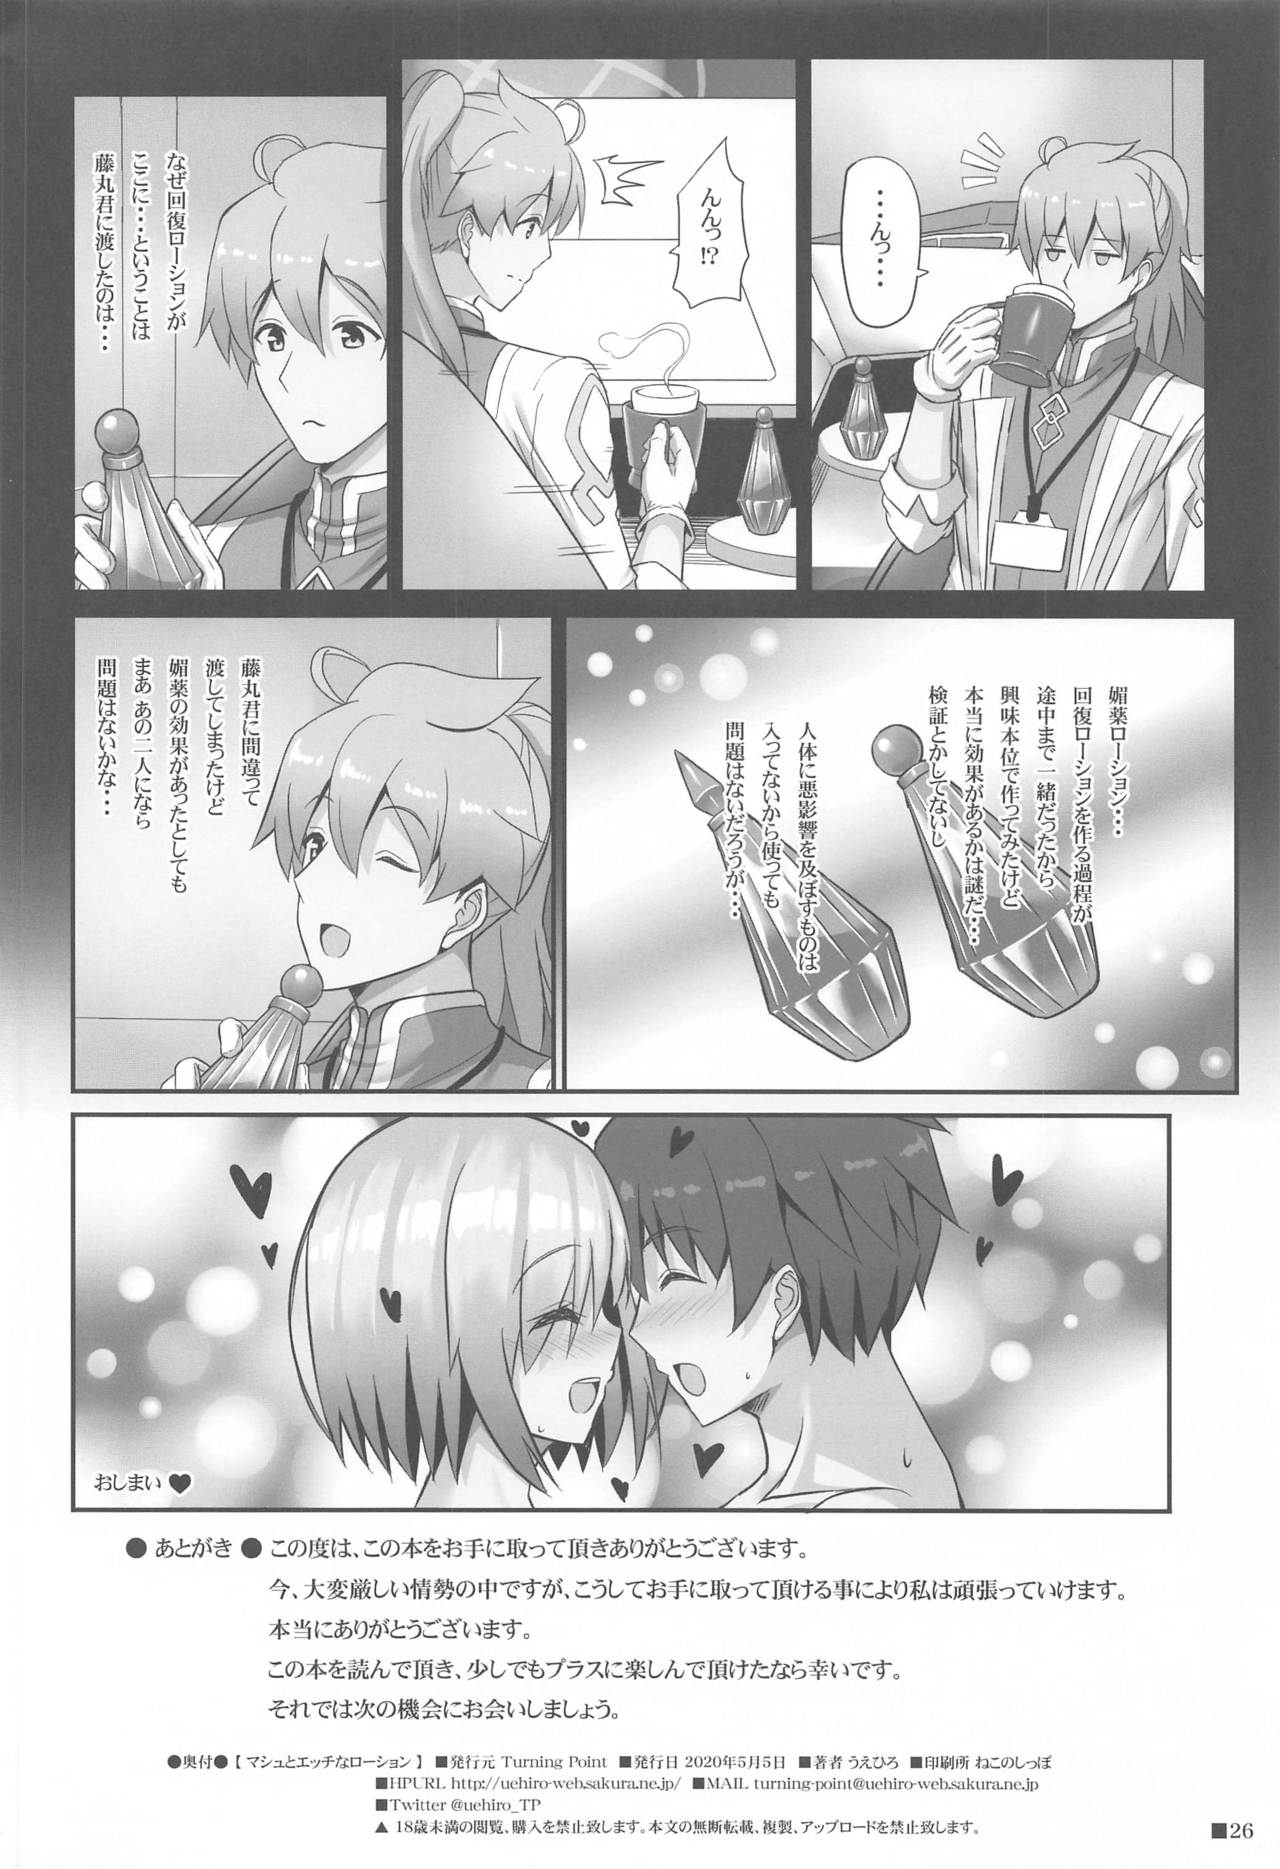 [Turning Point (Uehiro)] Mash to Ecchi na Lotion (Fate/Grand Order) page 25 full